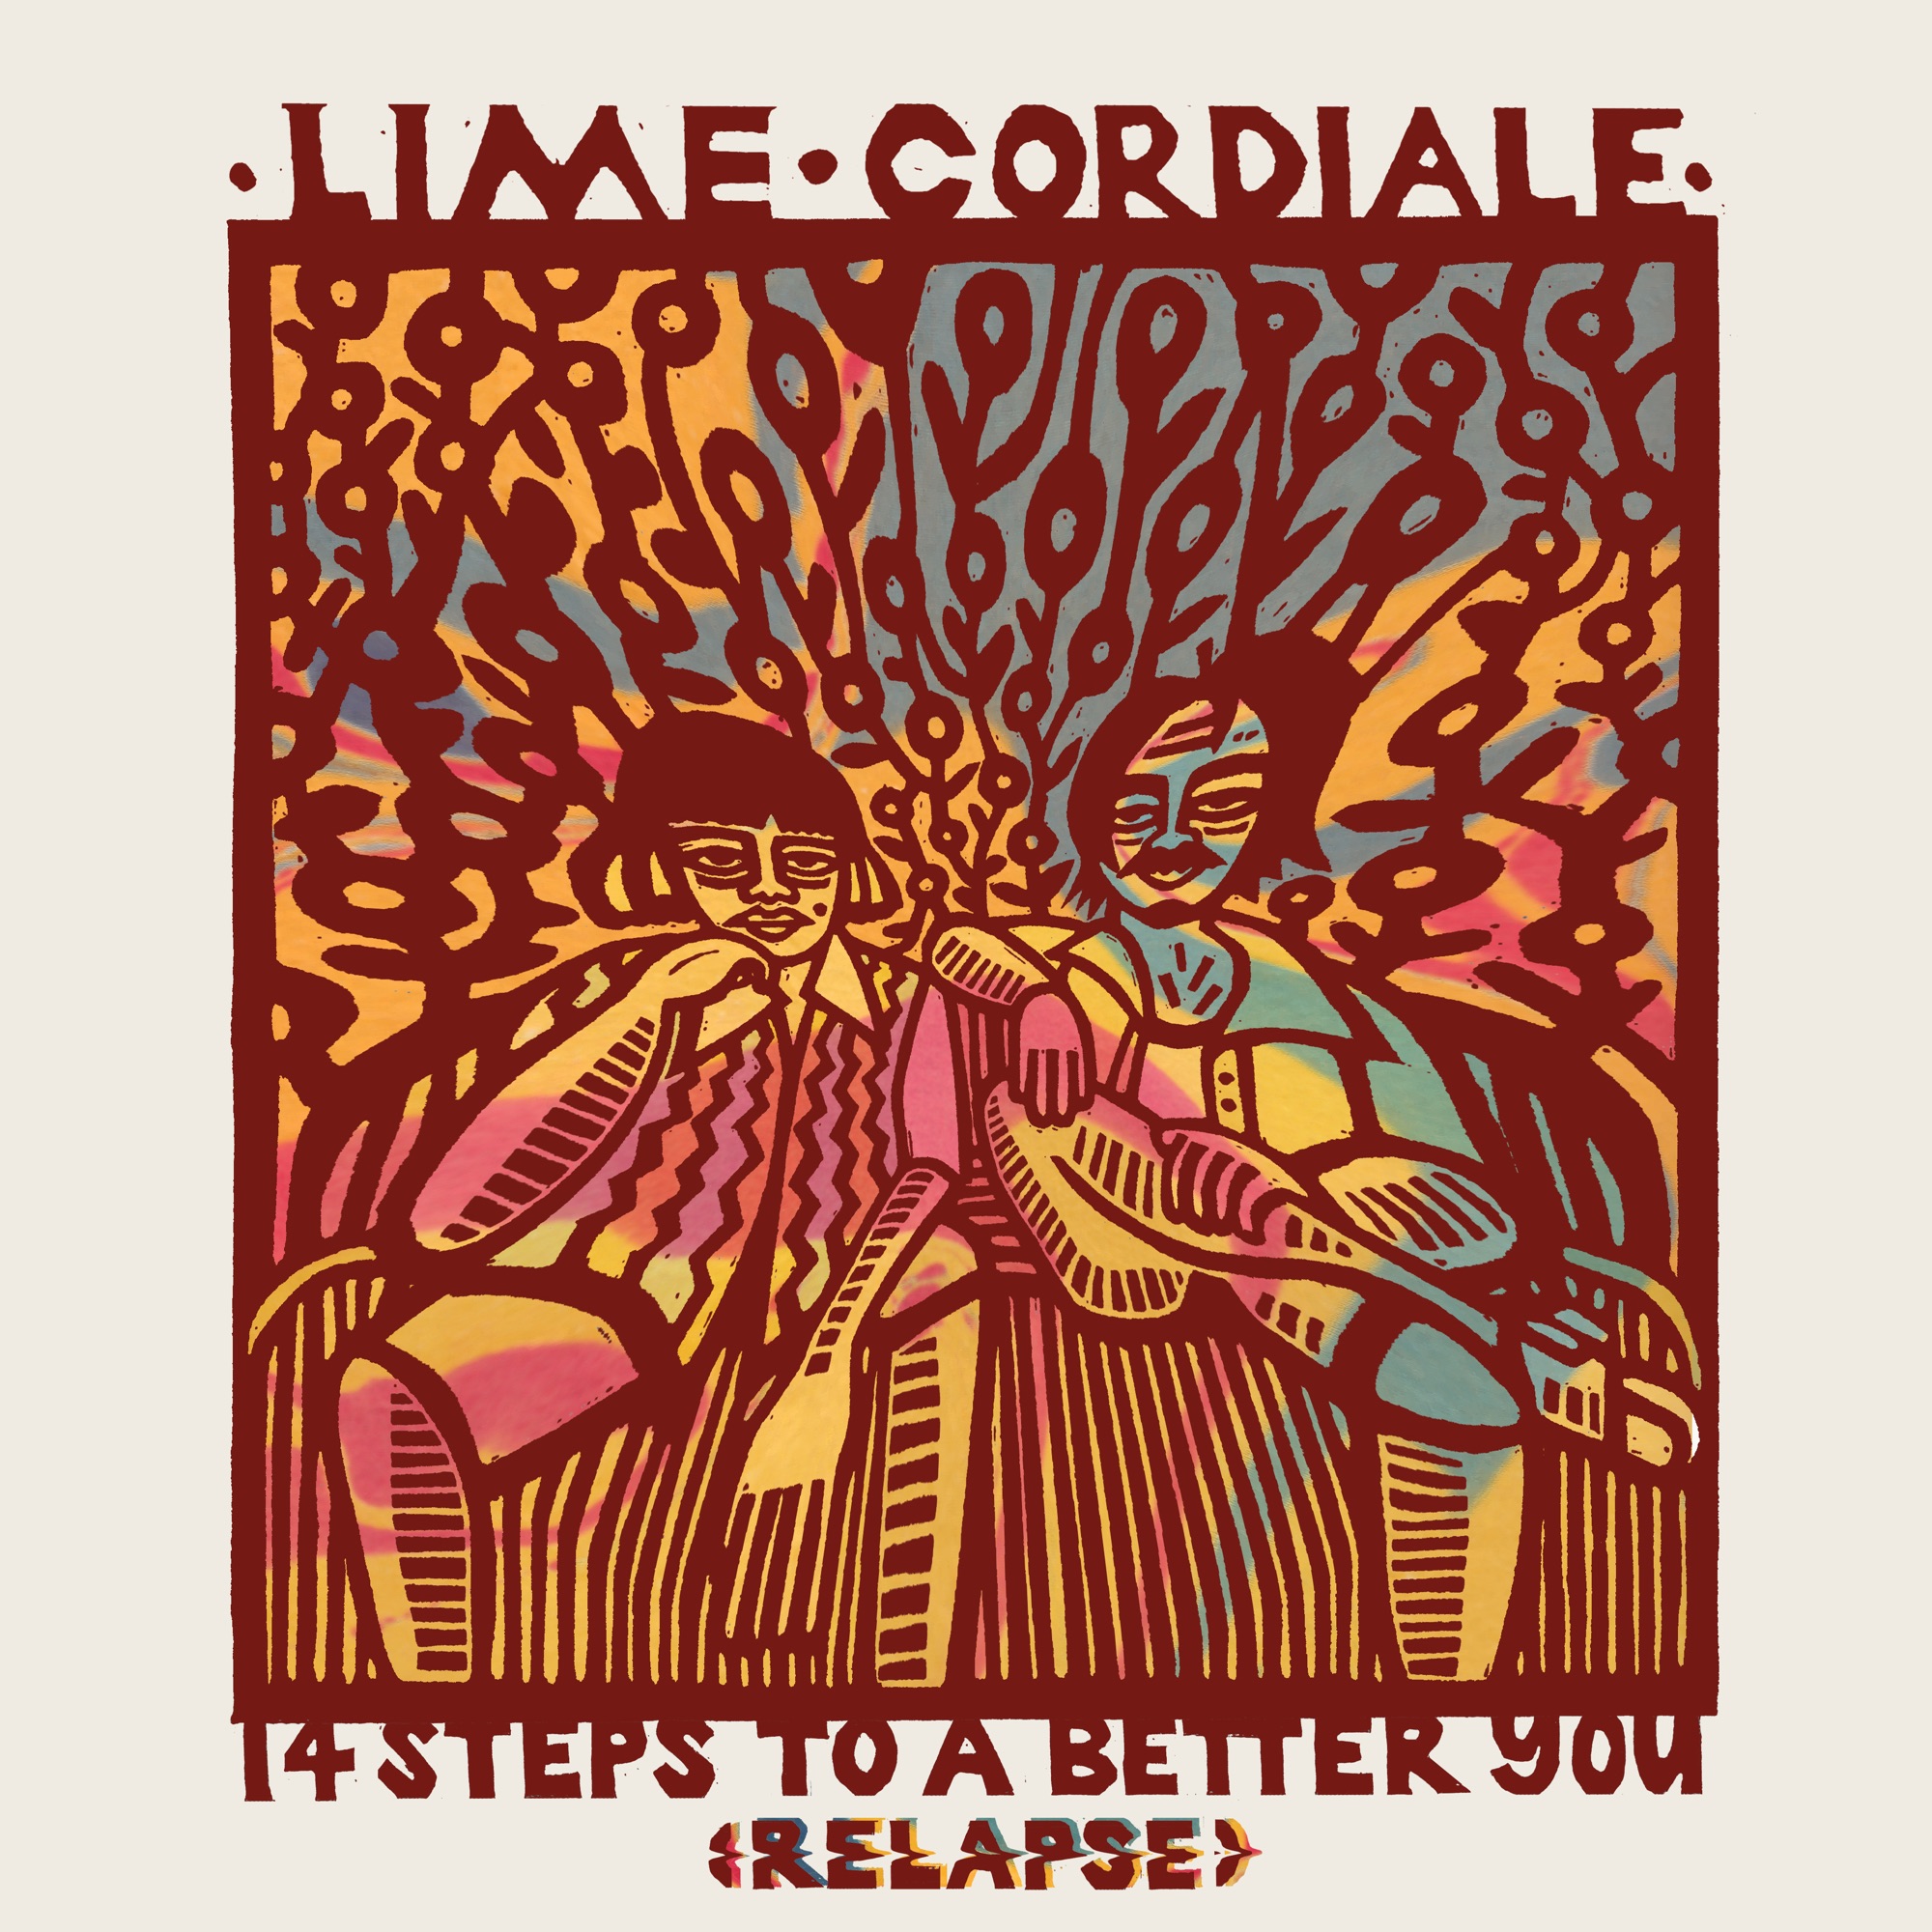 Lime Cordiale - 14 Steps To a Better You (Relapse)